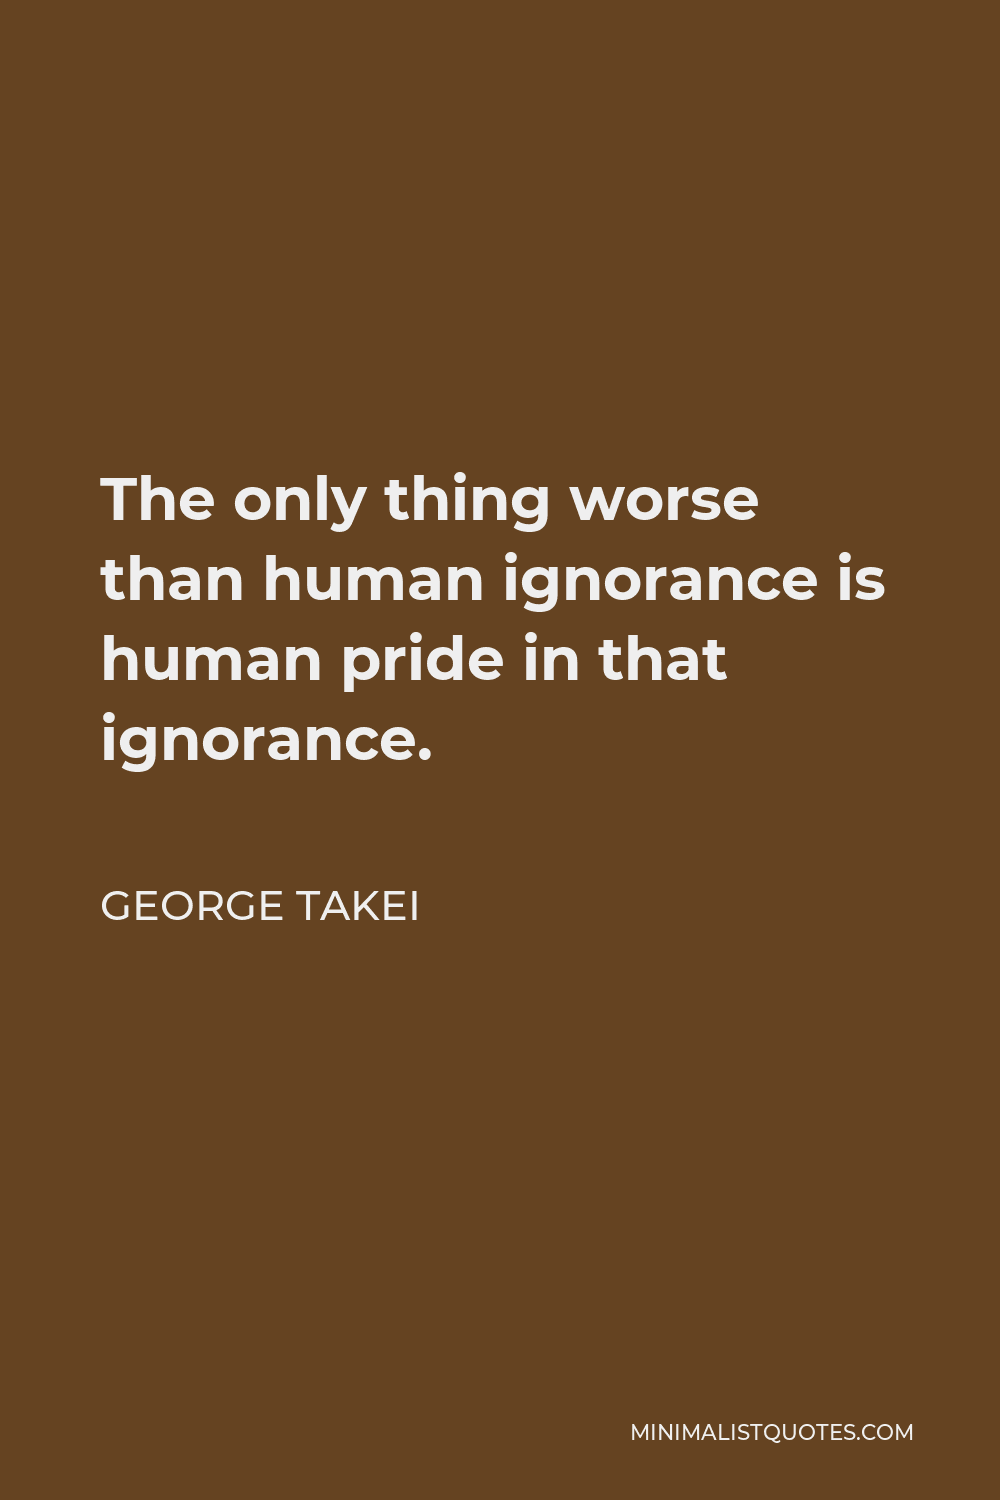 George Takei Quote - The only thing worse than human ignorance is human pride in that ignorance.